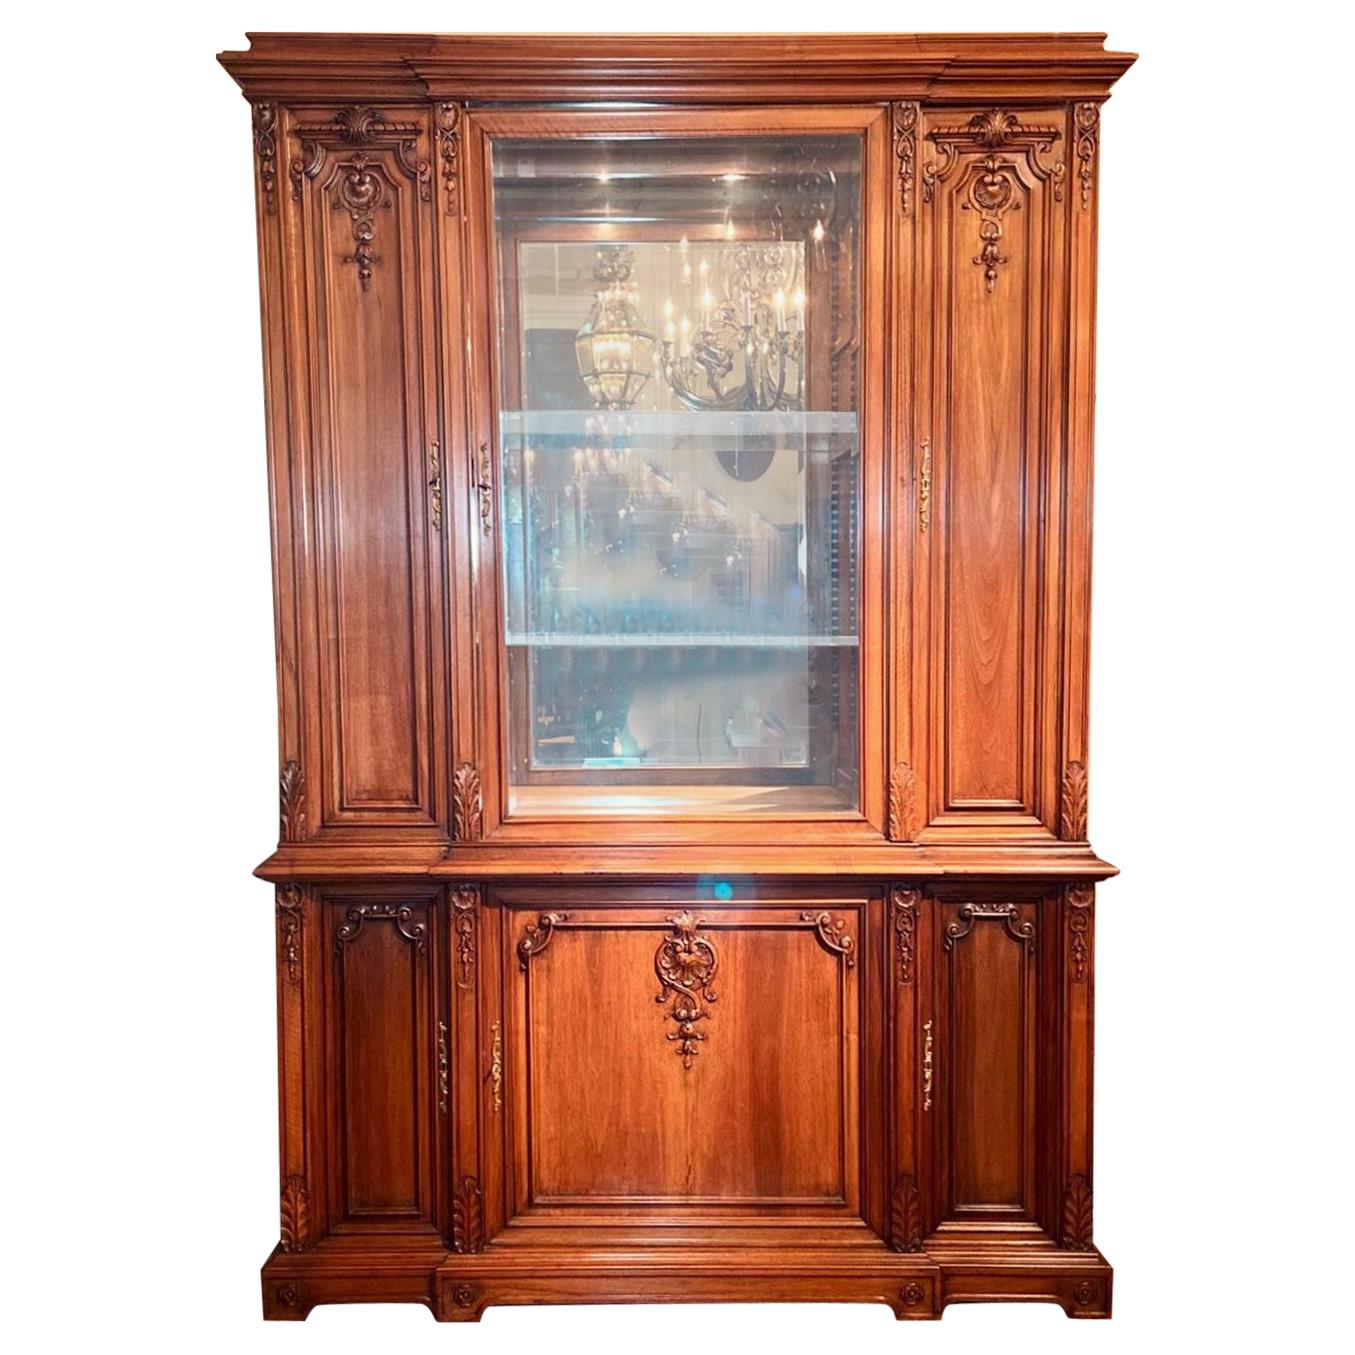 Antique French Hand-Carved Walnut Display Cabinet, Circa 1890-1910